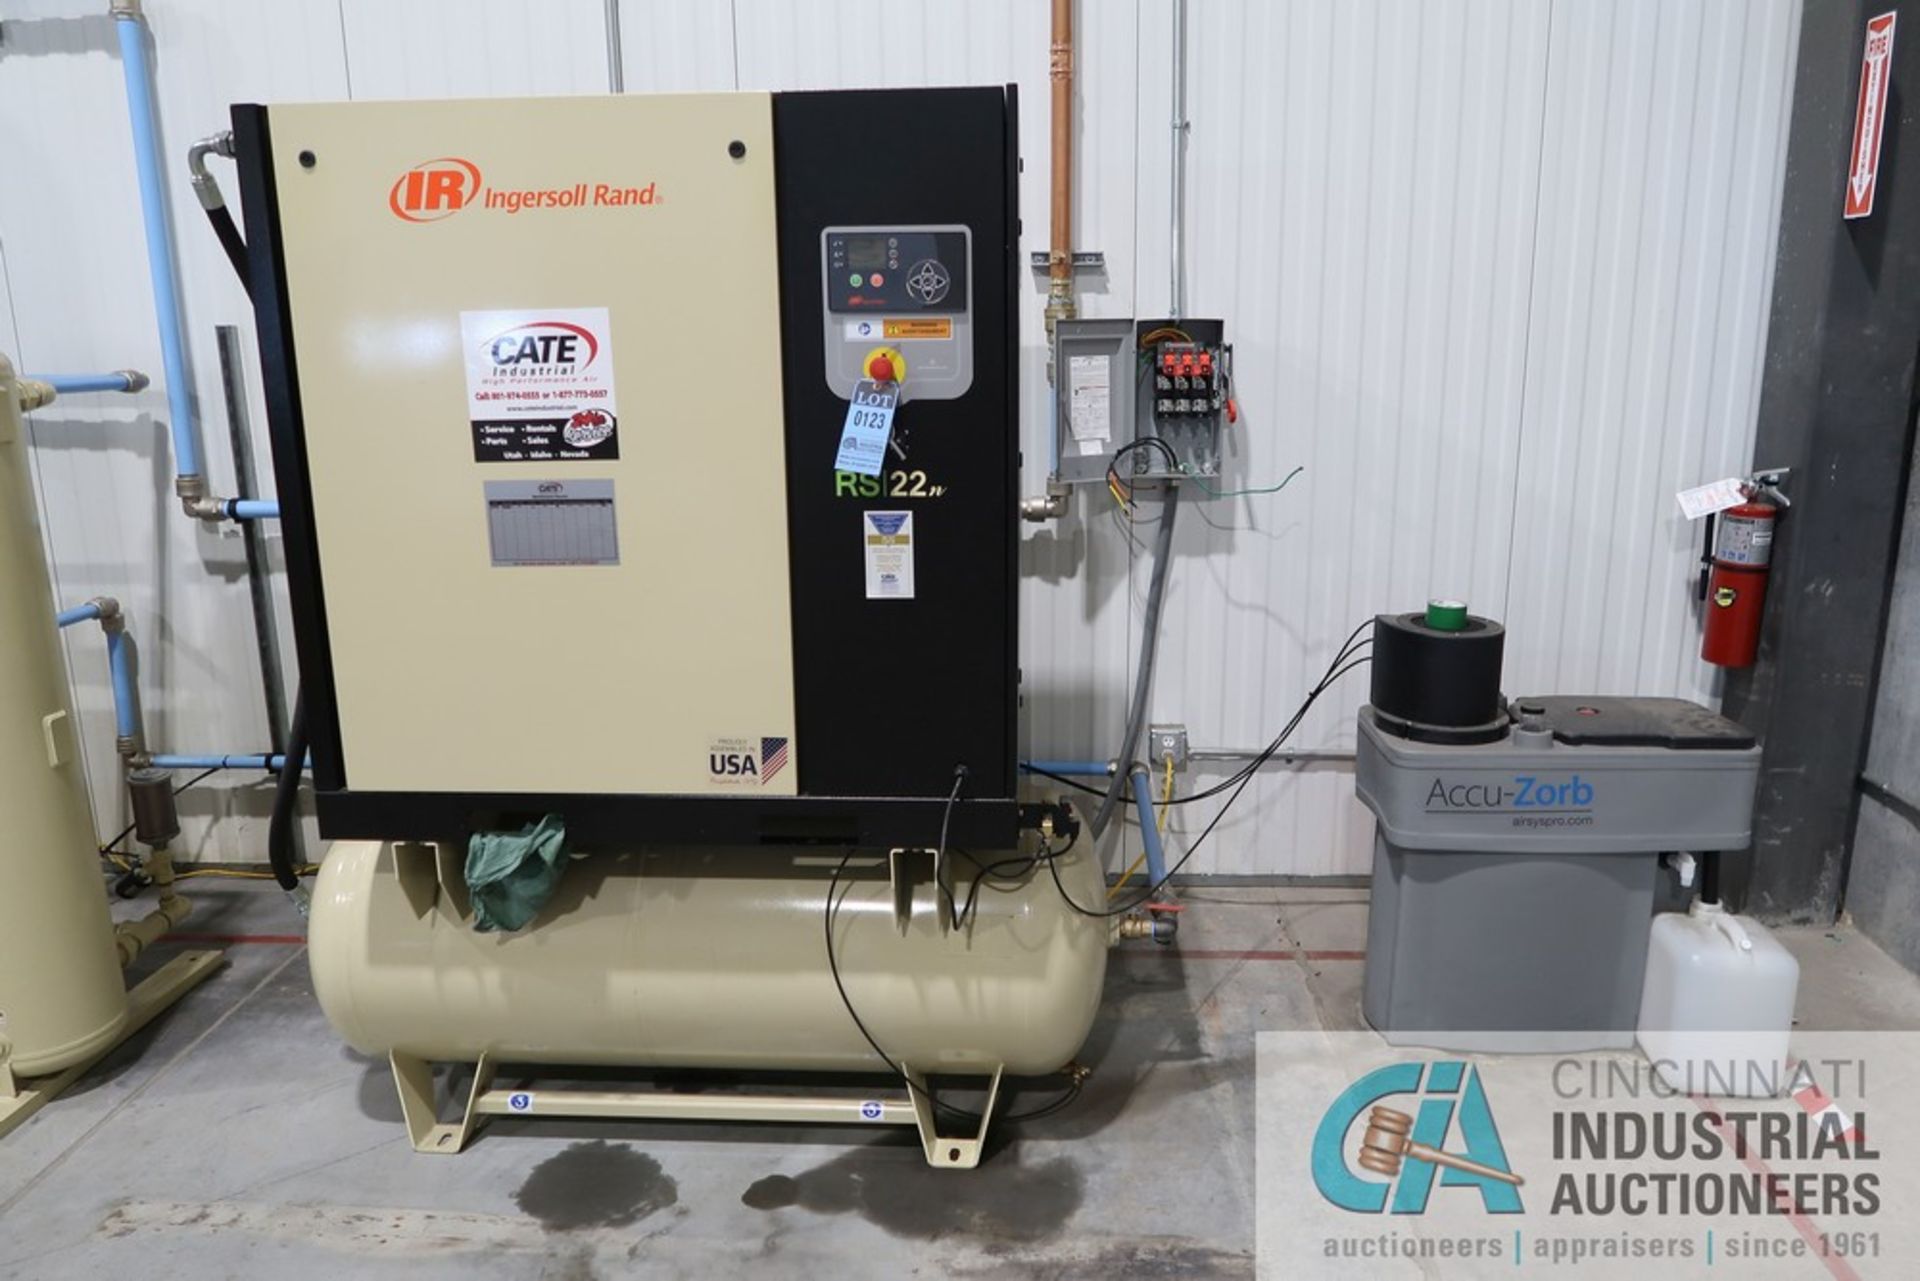 30 HP INGERSOLL RAND MODEL RS22N-145 ROTARY SCREW AIR COMPRESSOR; S/N CBV796016, WITH ACCUZORB MODEL